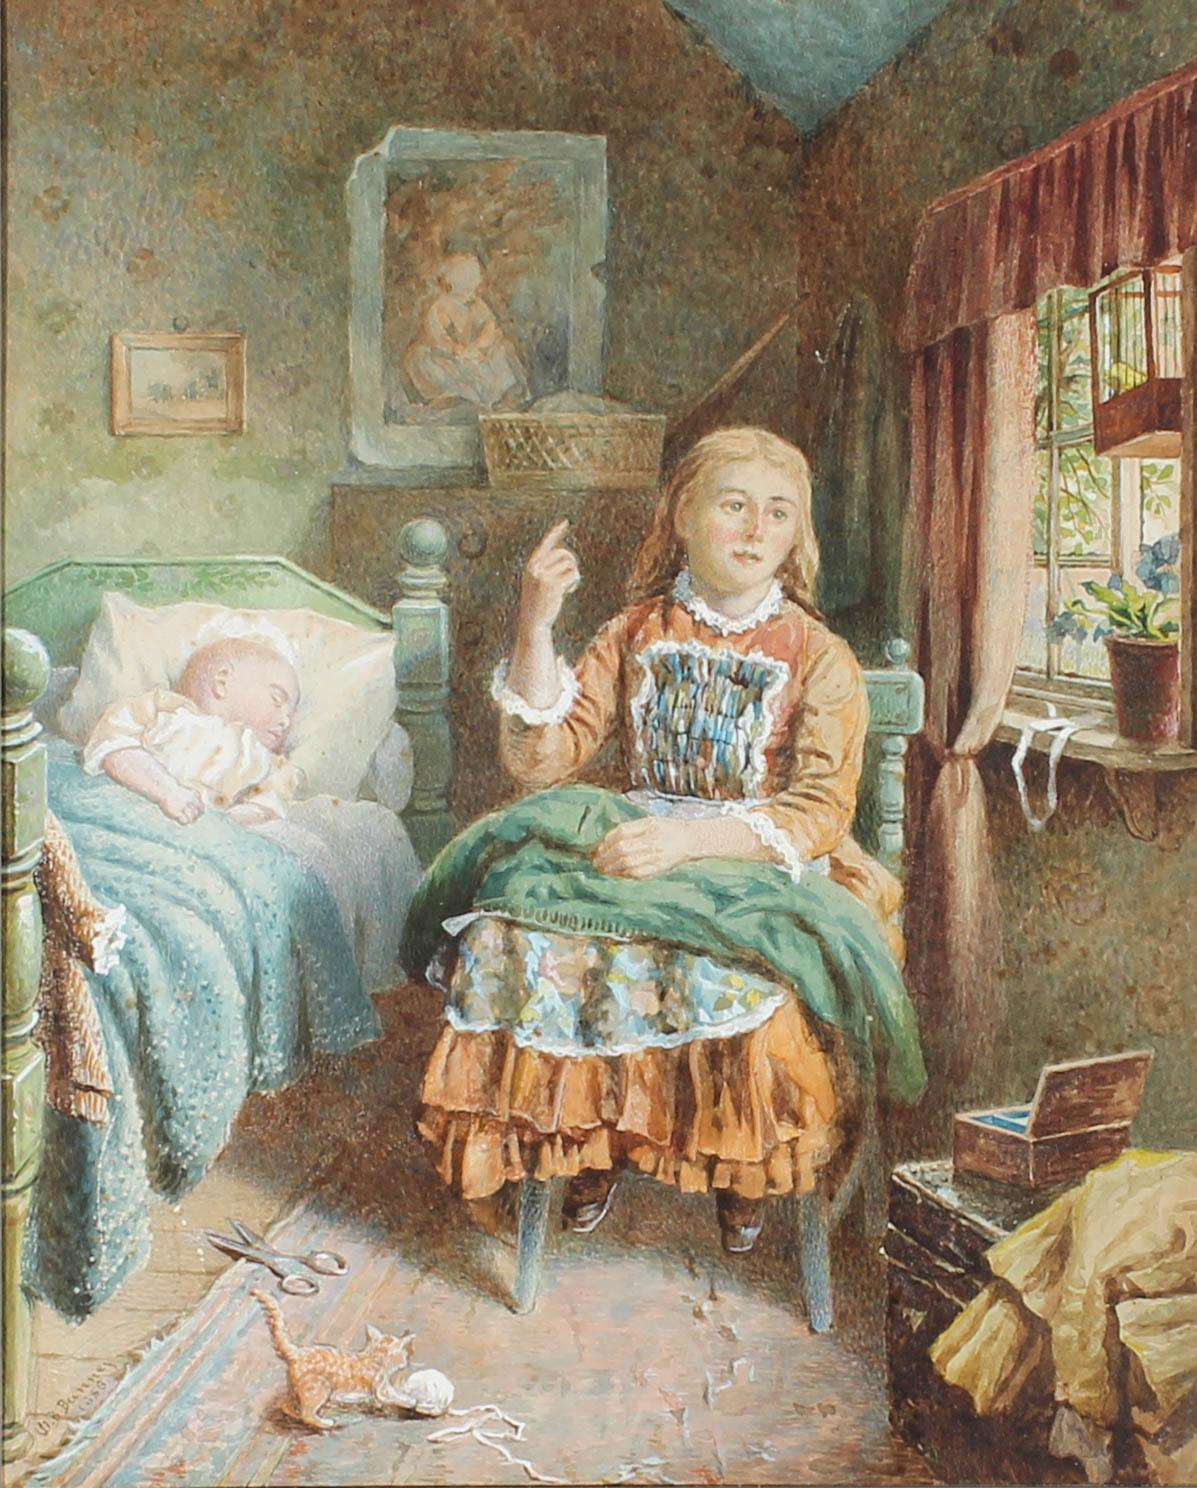 A charming Victorian watercolor interior scene showing a young girl sitting in a wooden chair with a green blanket on her lap while a baby sleeps in a bed at her side. The sun shines through an open window and a kitten plays with a ball of string on